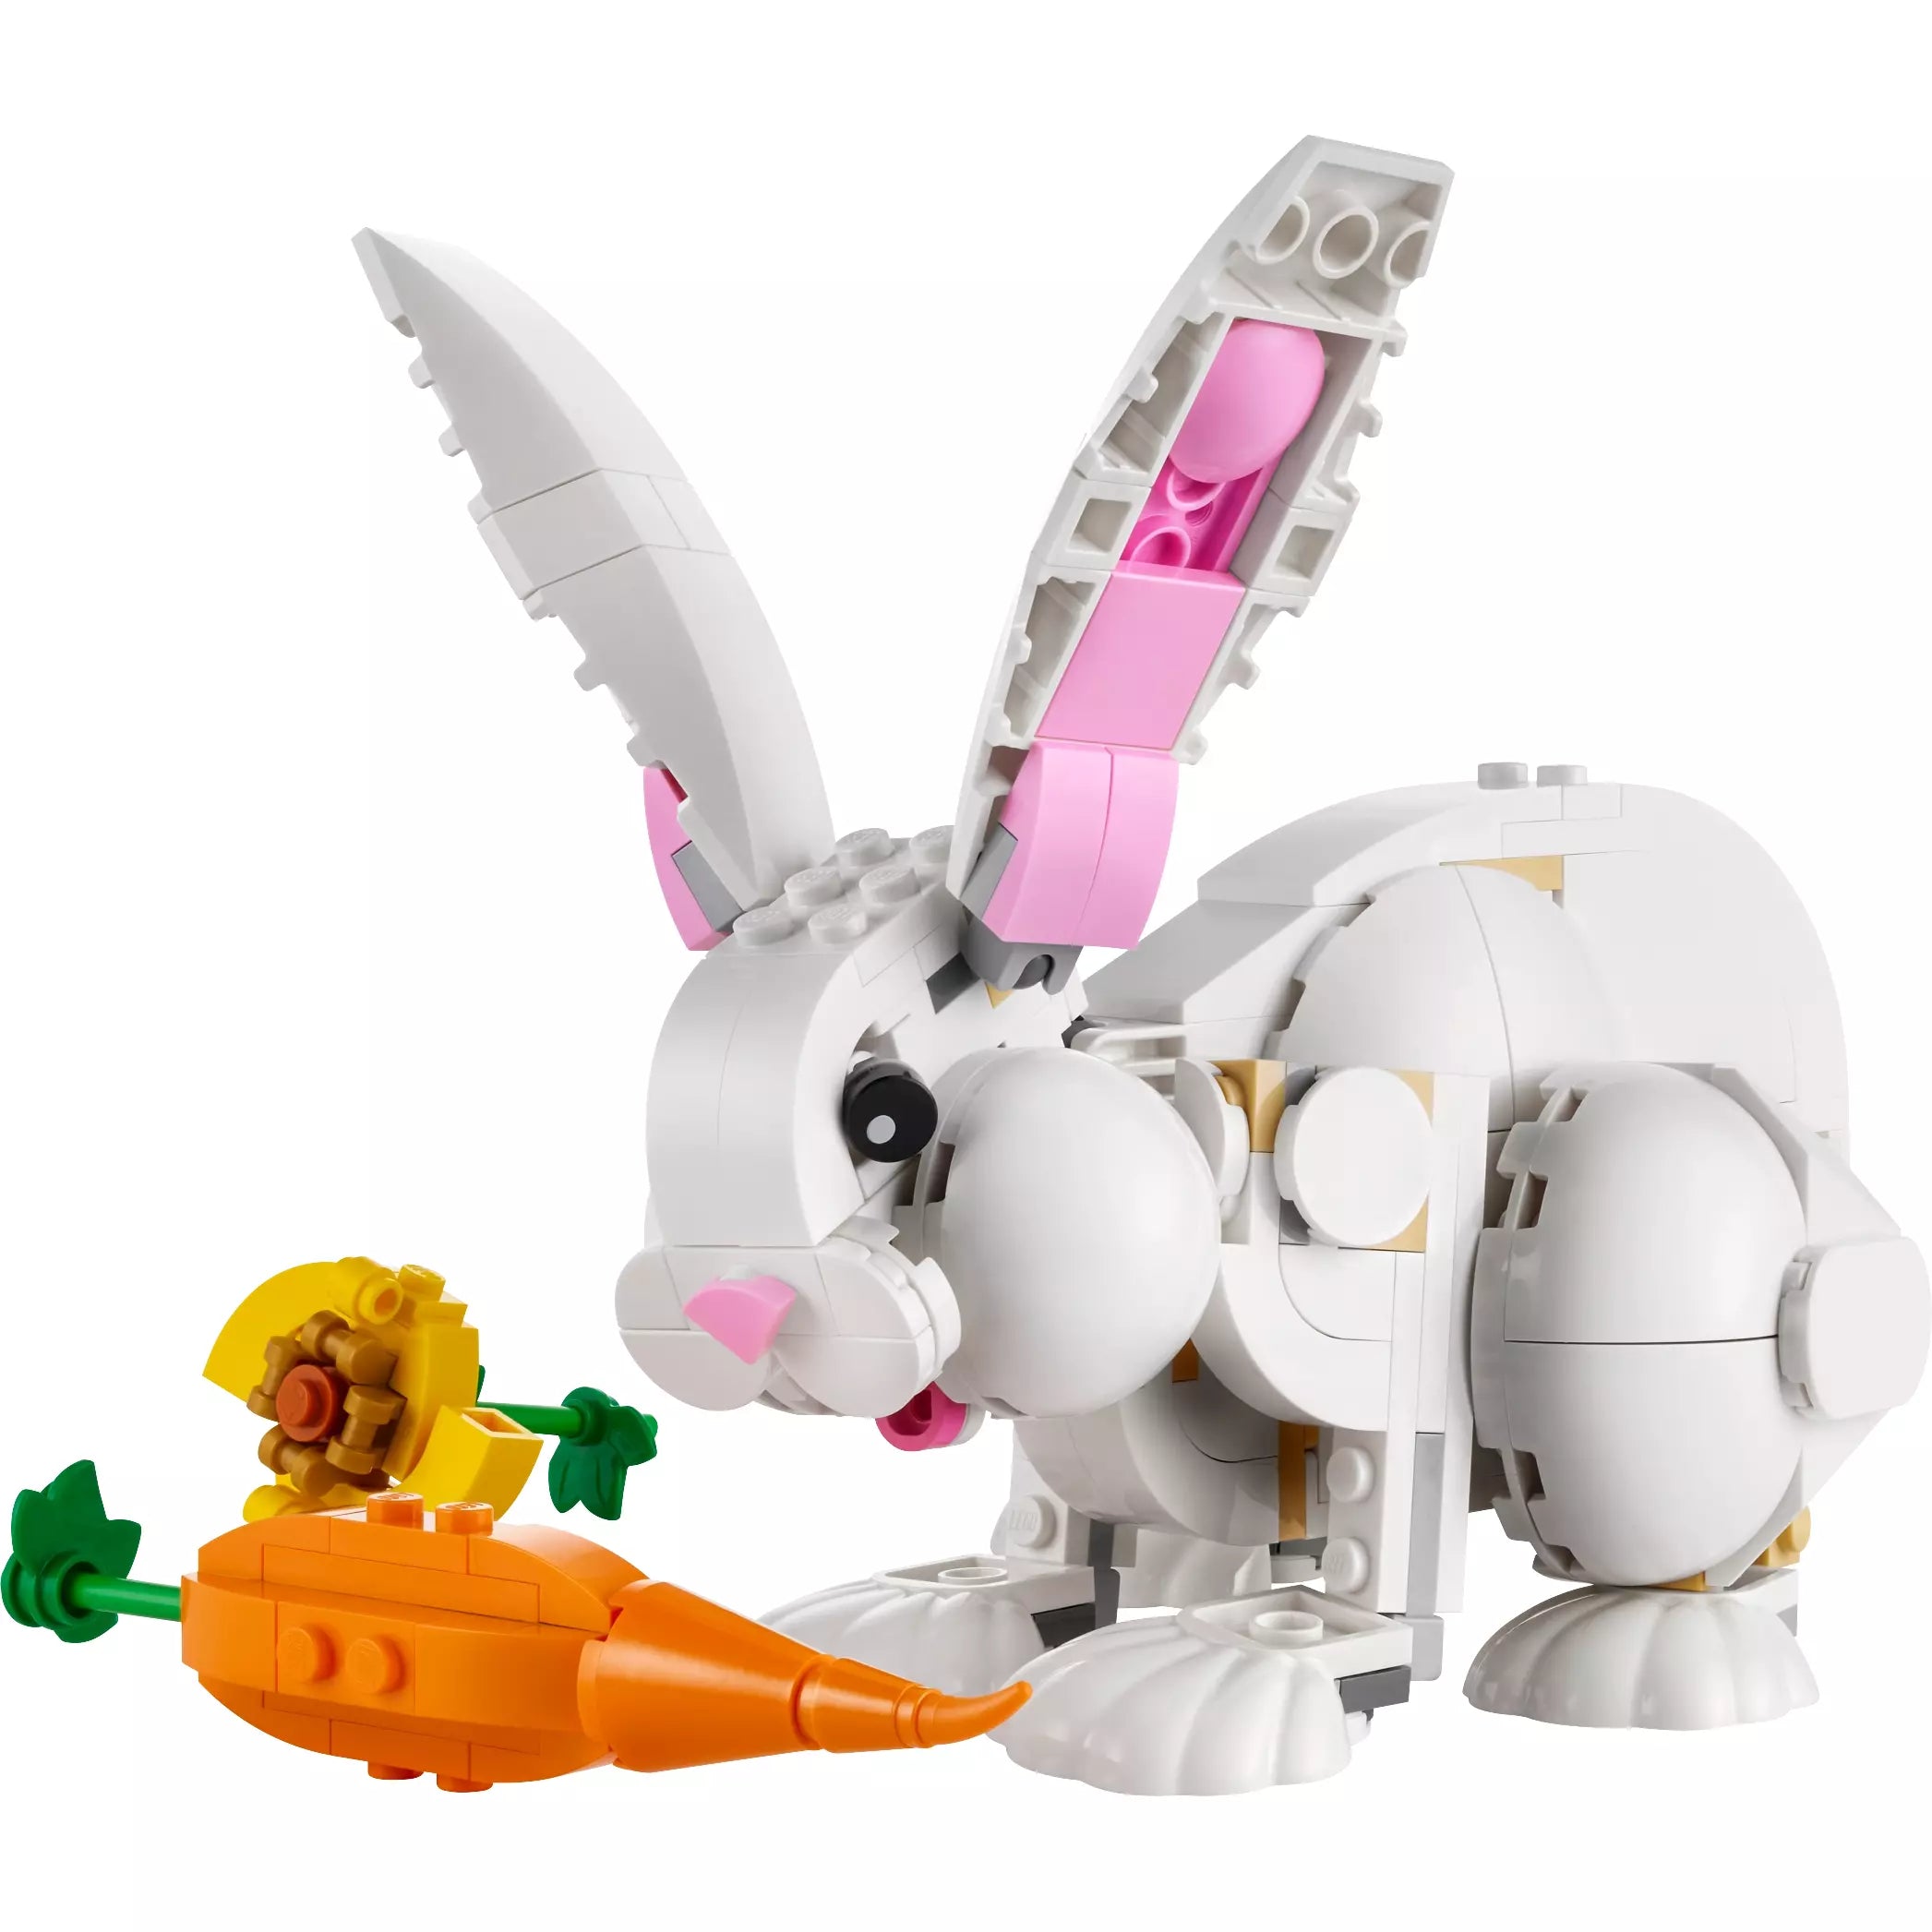 LEGO 31133 Creator 3in1 White Rabbit Animal Toy Building Set, Easter Bunny to Seal and Parrot Figures.